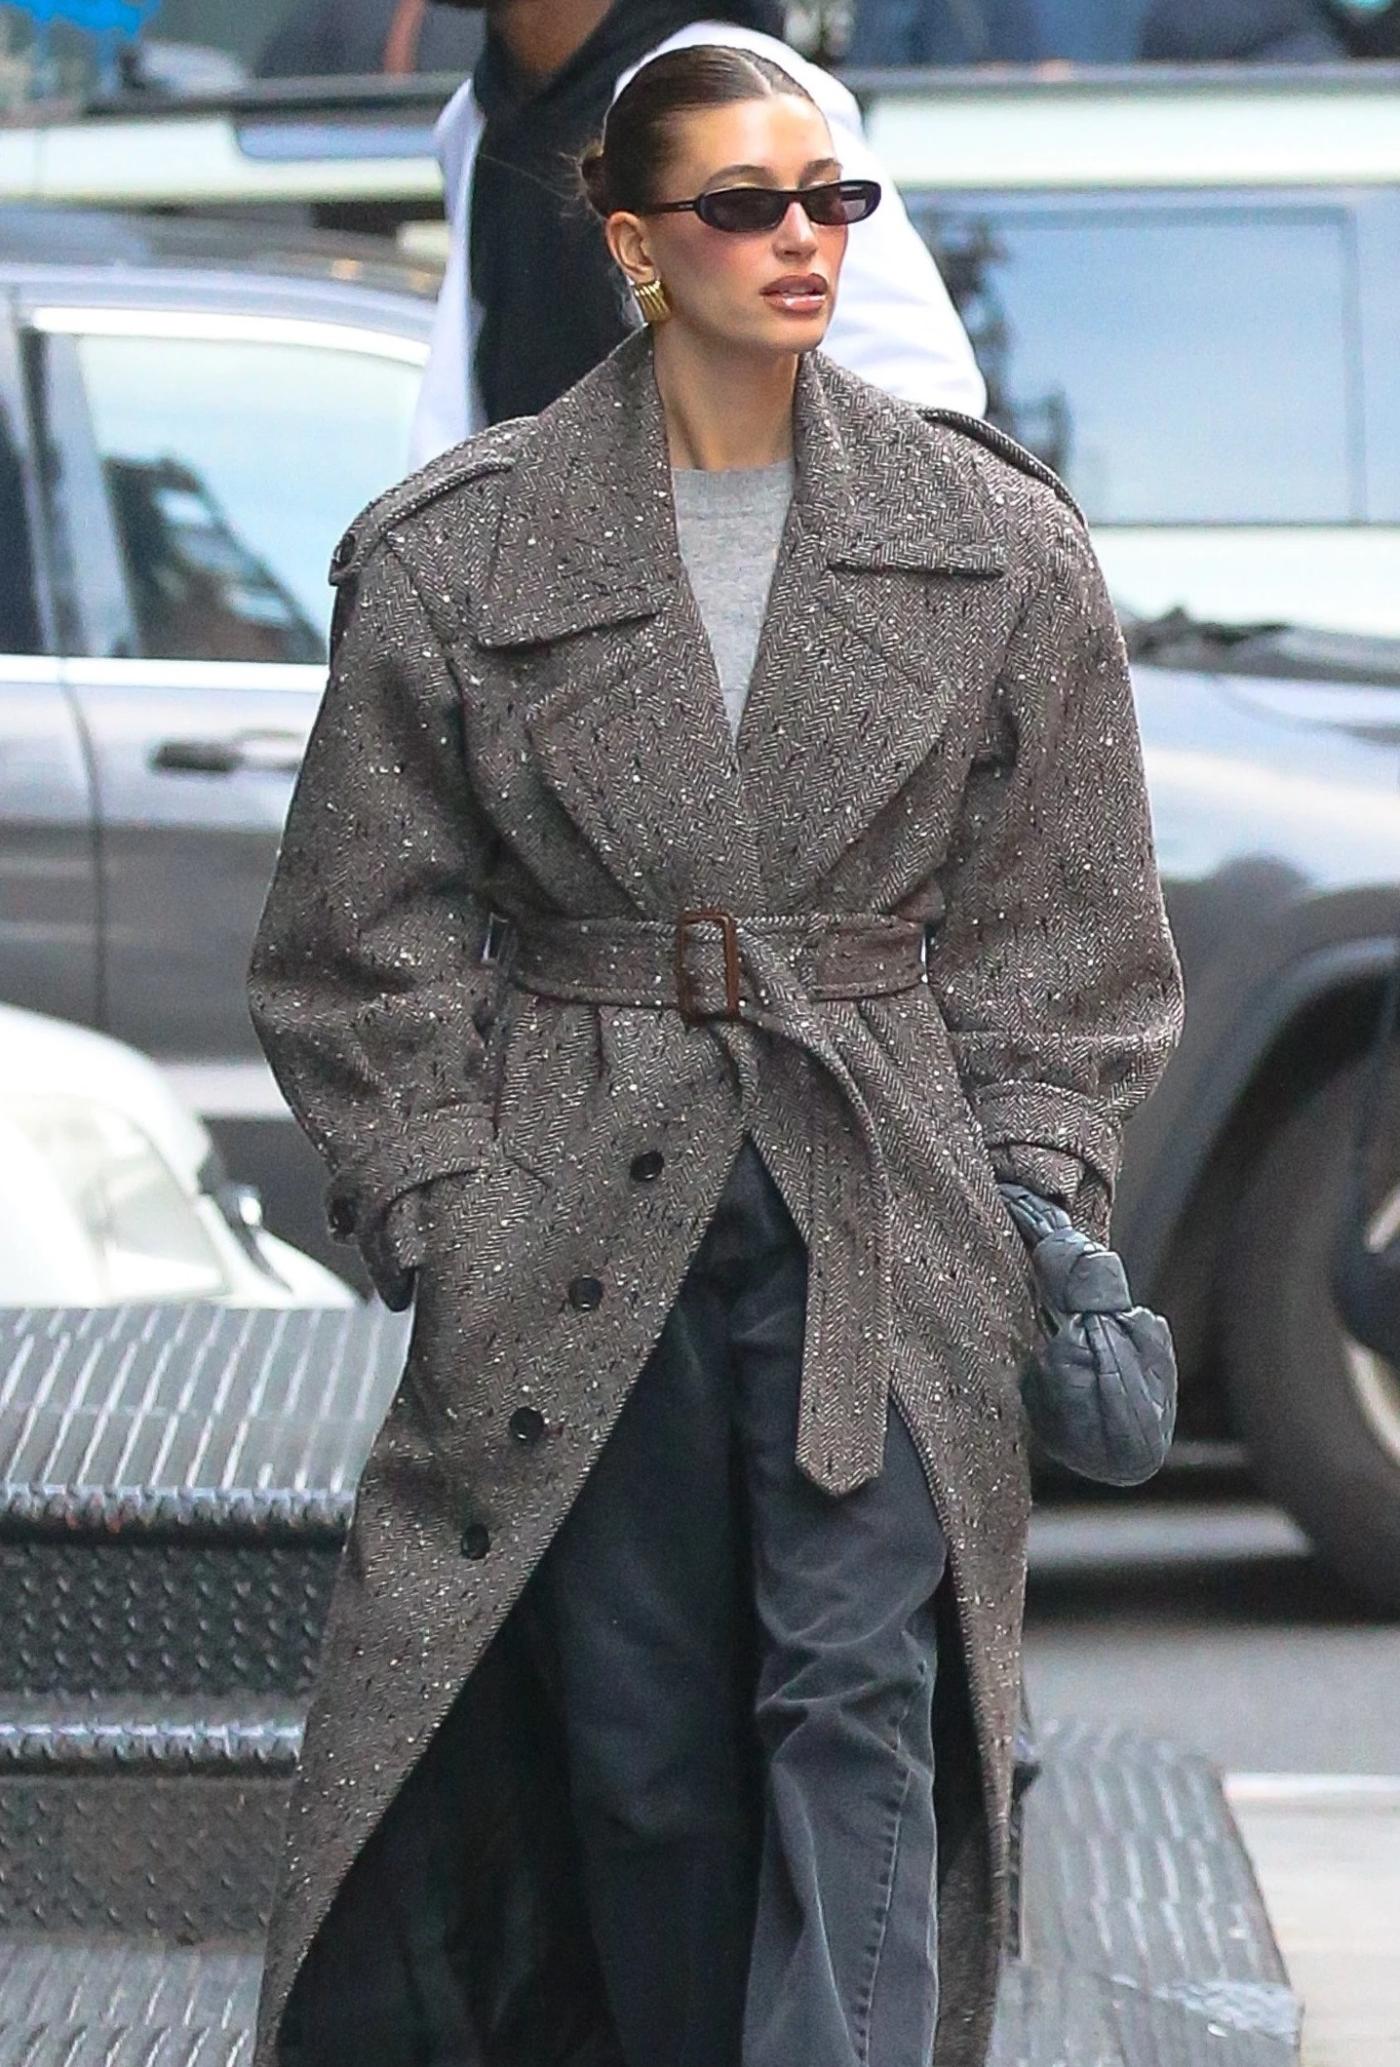 Hailey Bieber Wore a Utility-Style Jacket in LA